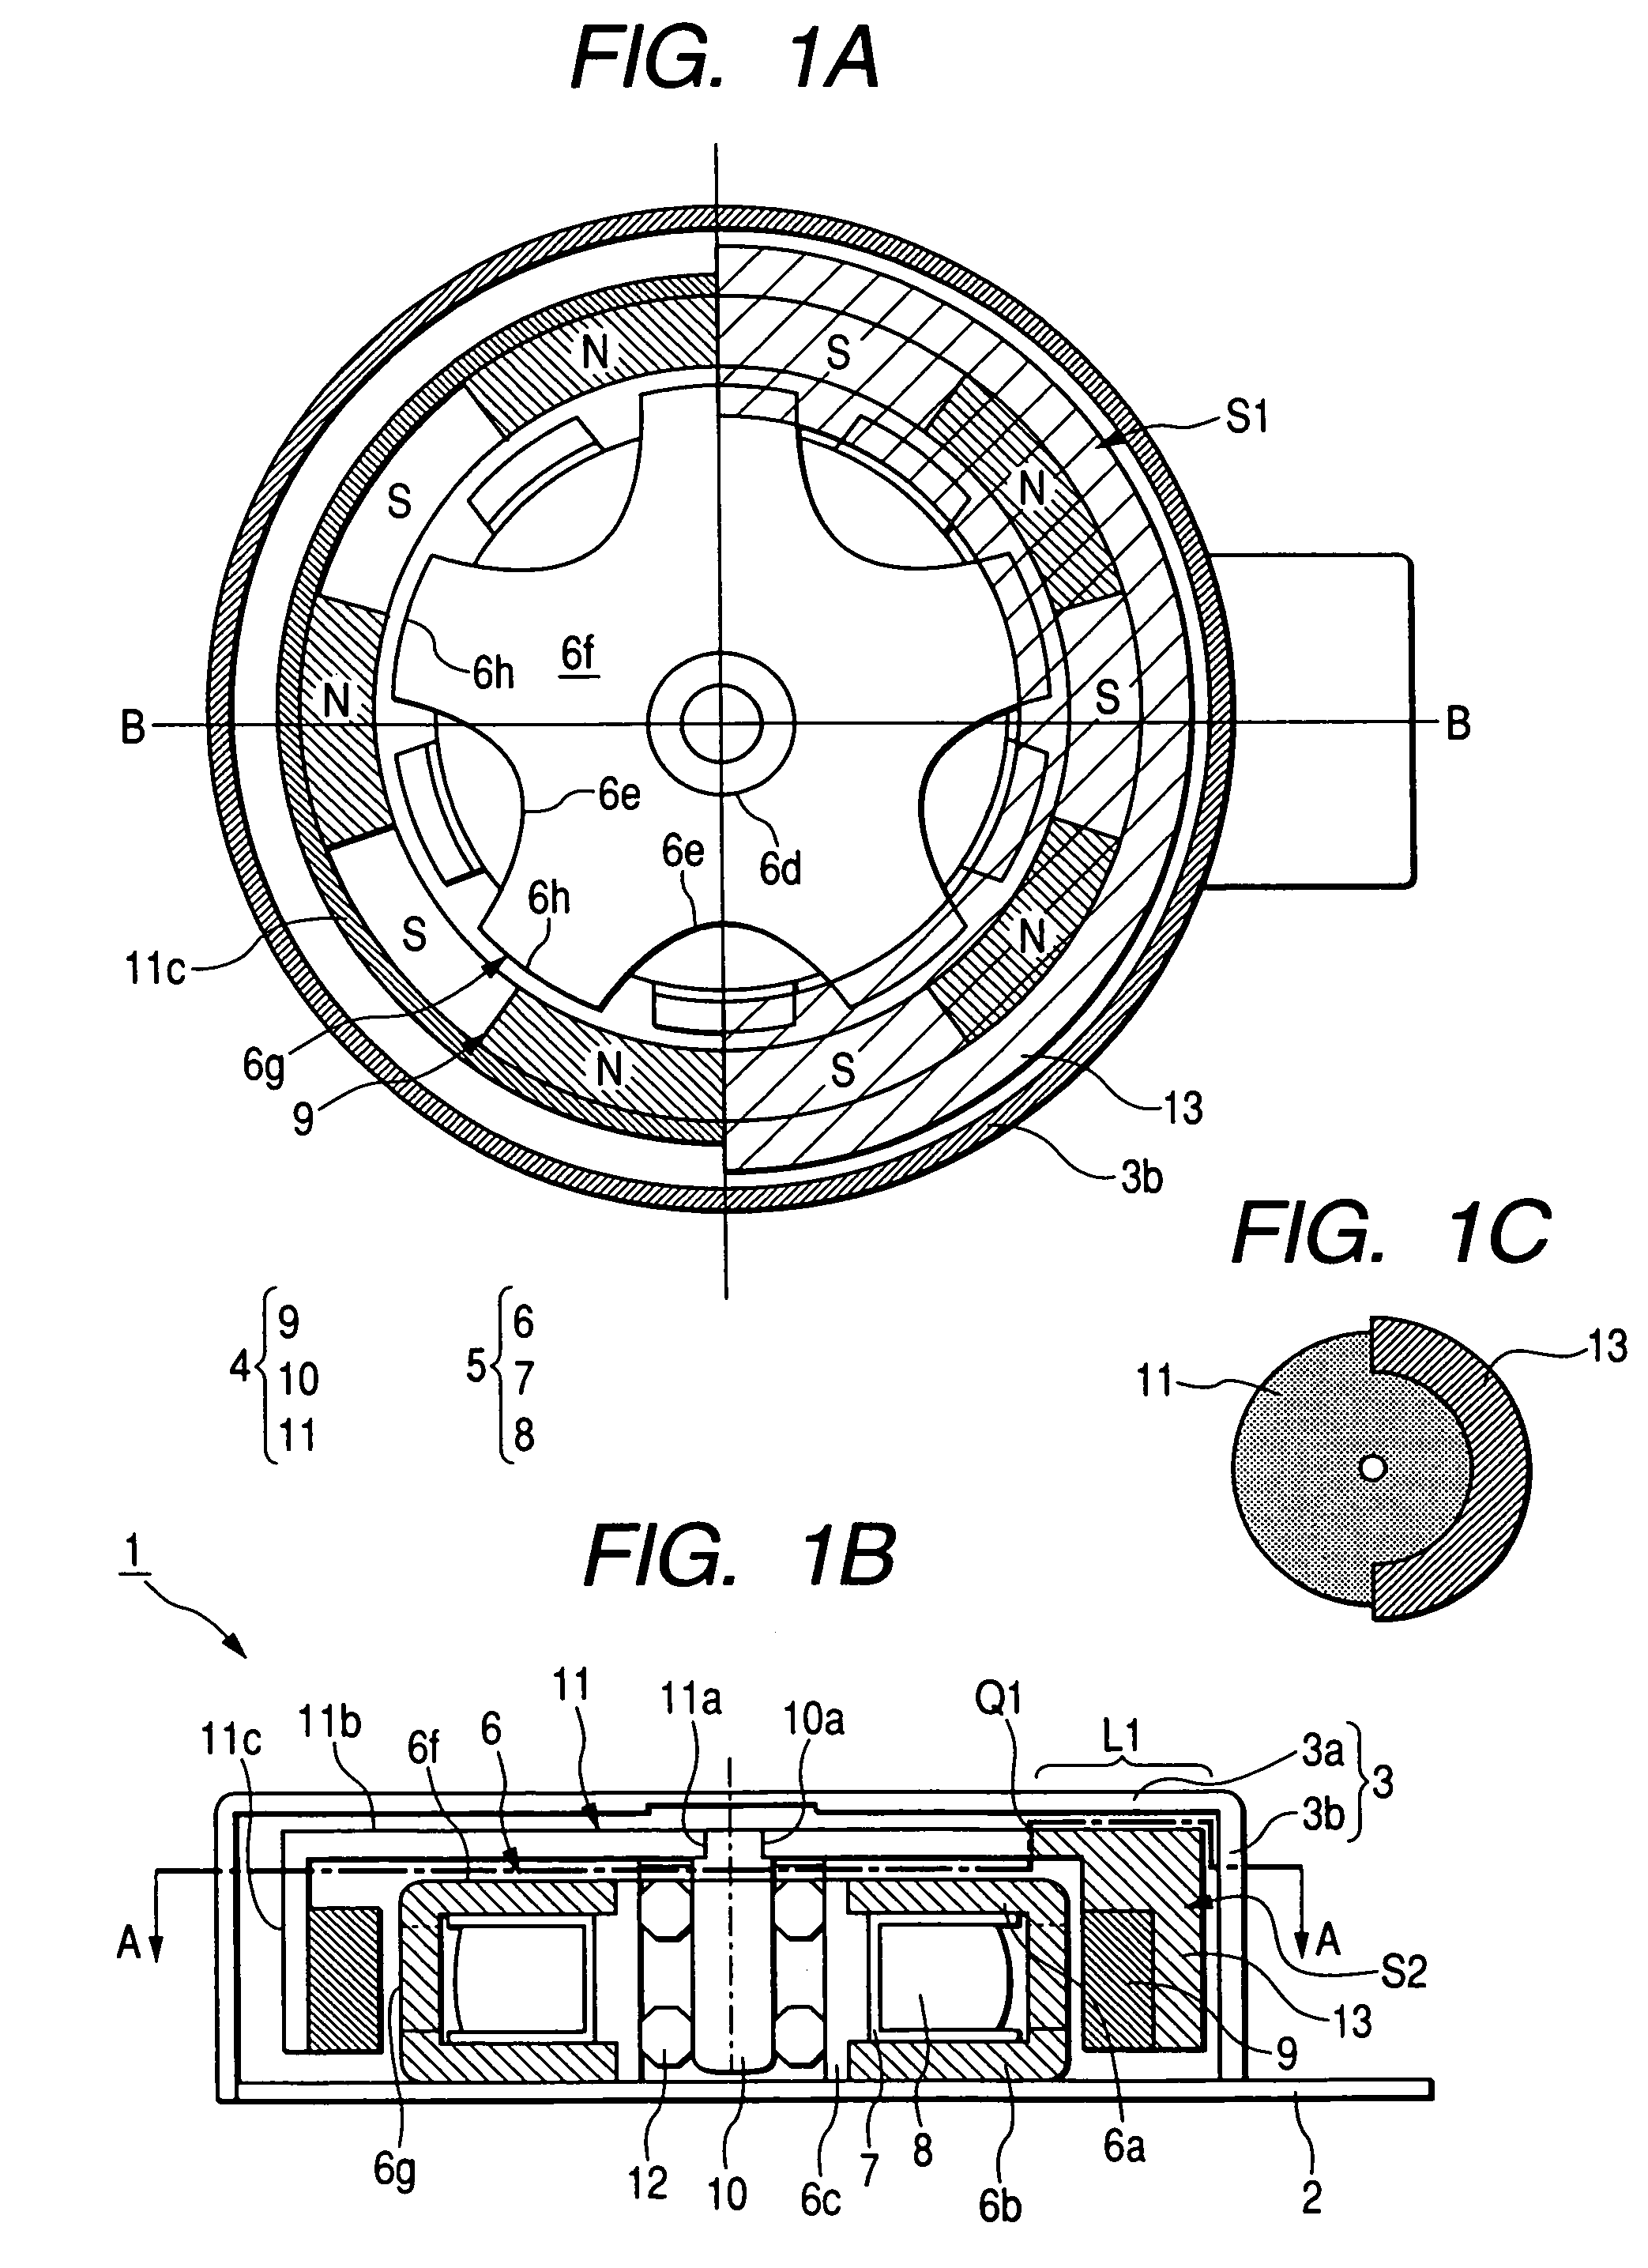 Stepping motor for generating vibration